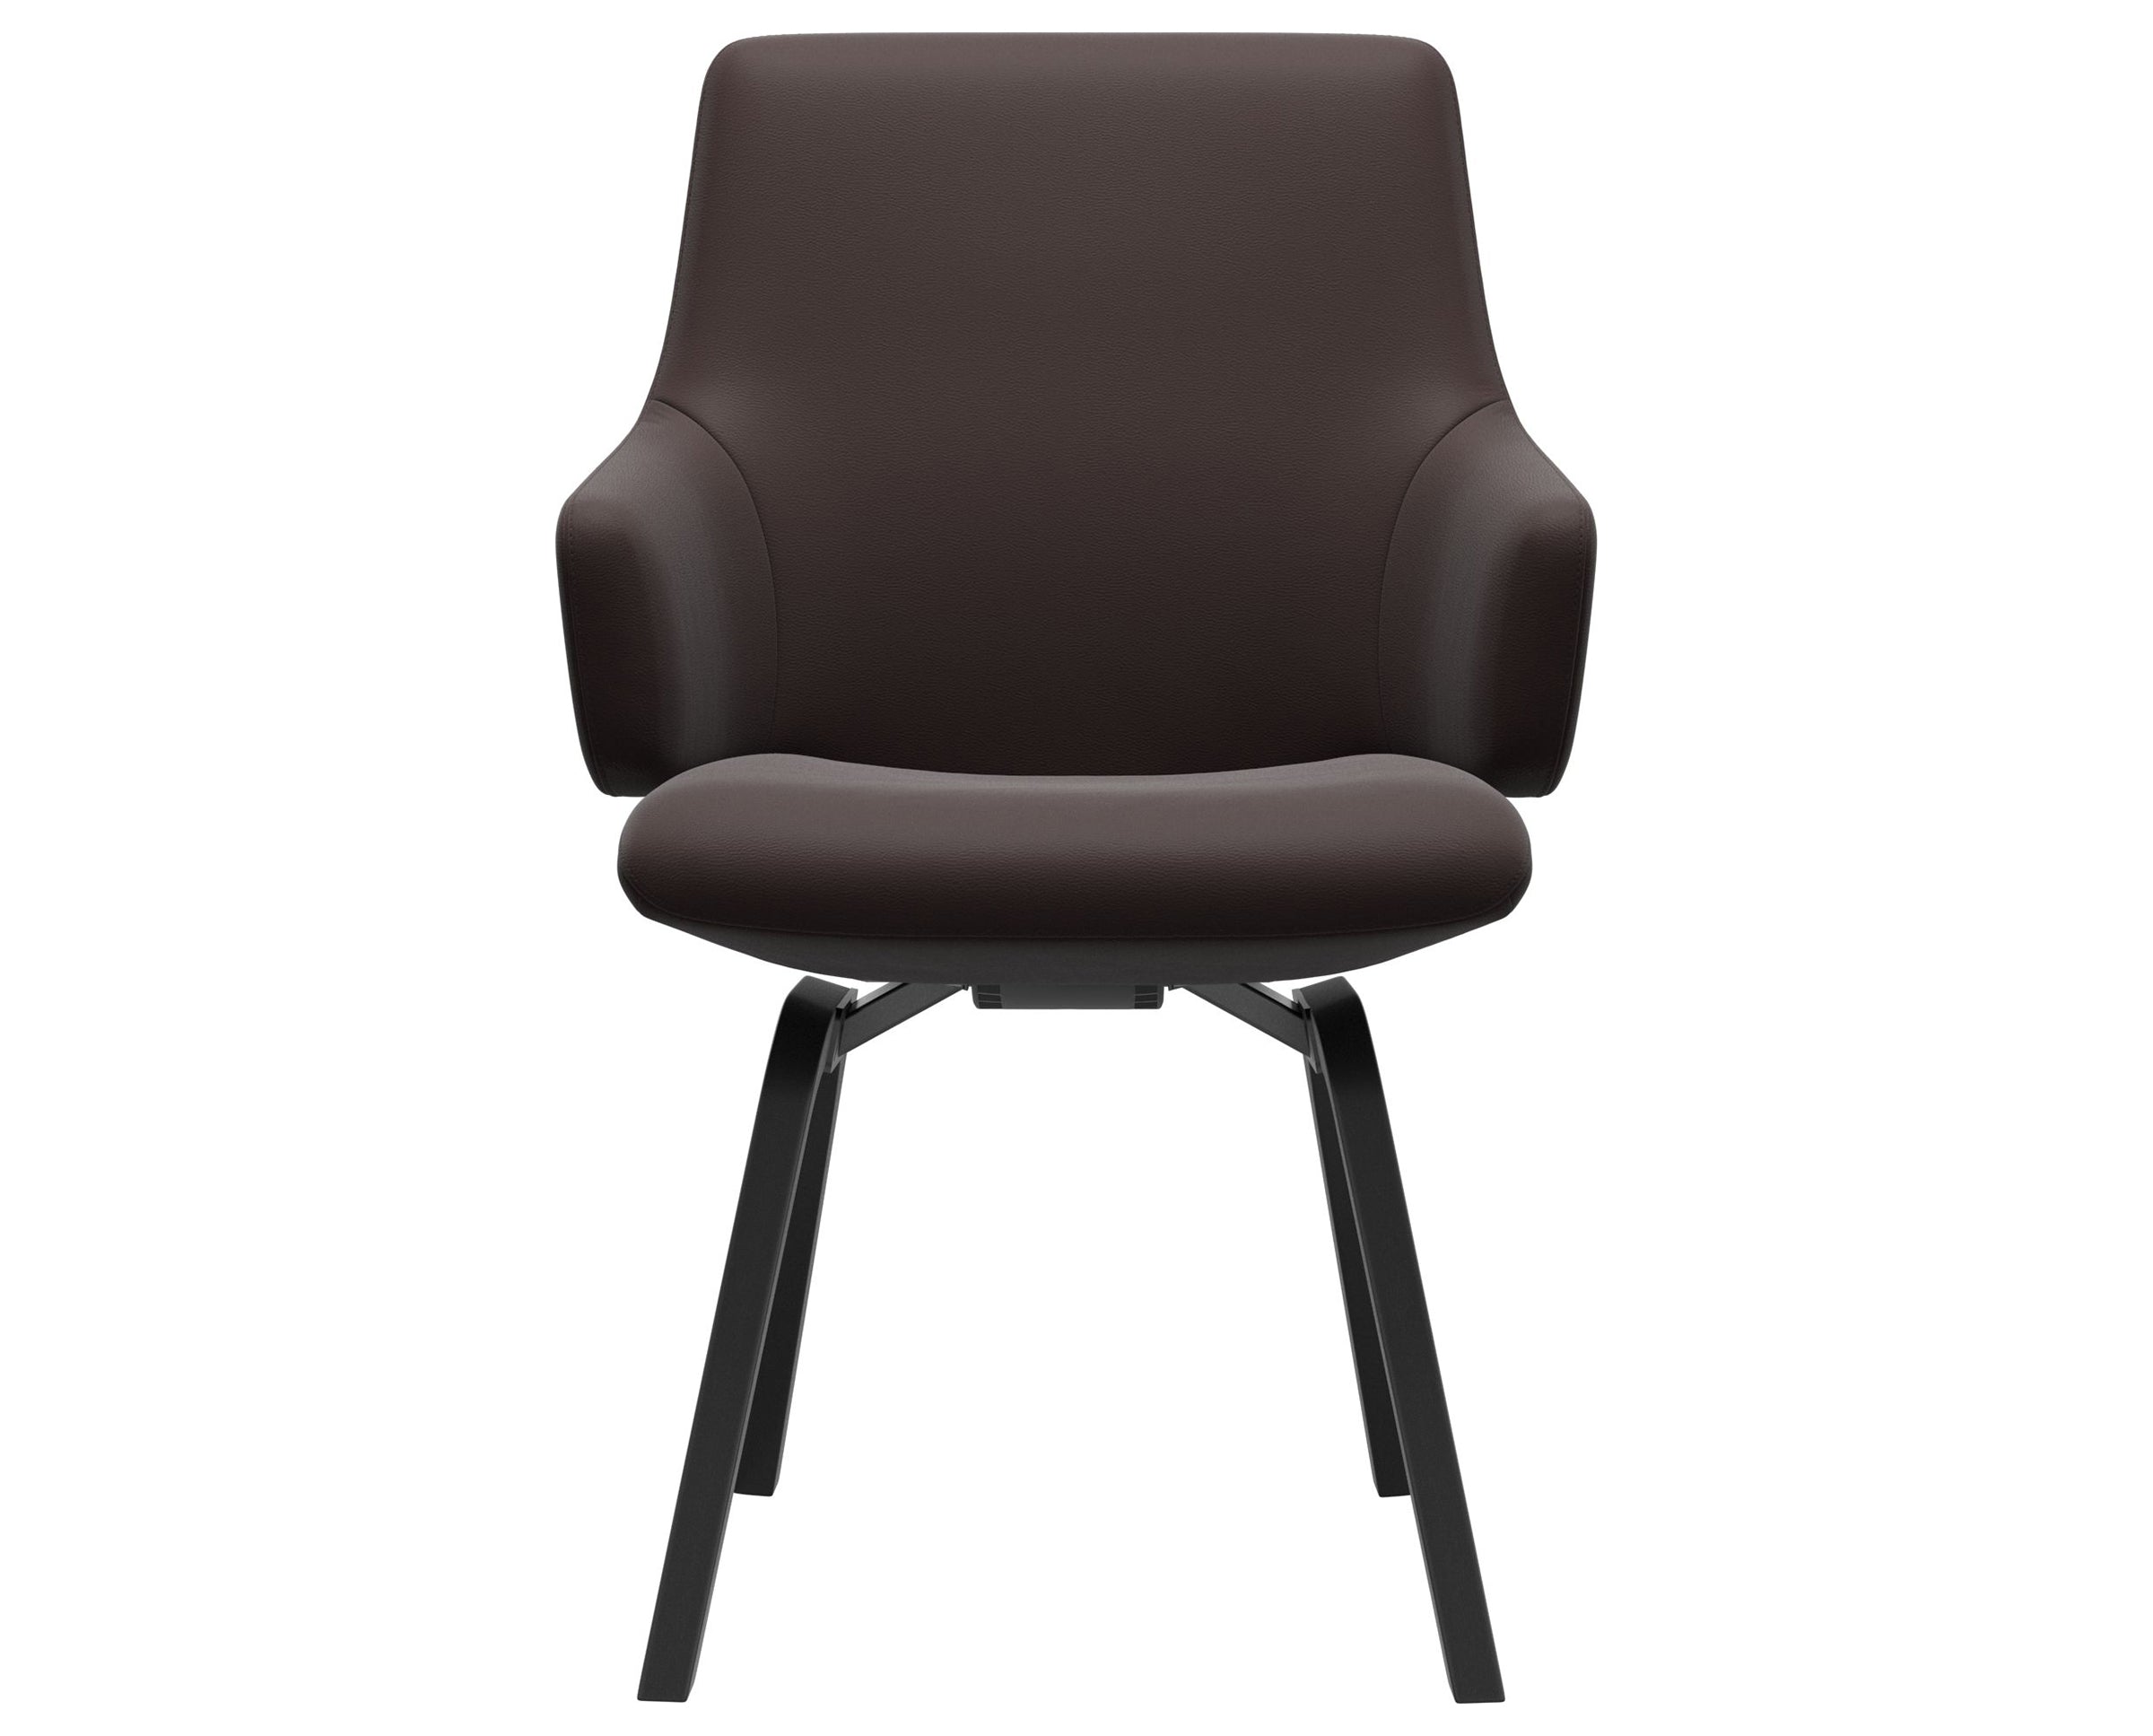 Paloma Leather Chocolate and Black Base | Stressless Laurel Low Back D200 Dining Chair w/Arms | Valley Ridge Furniture